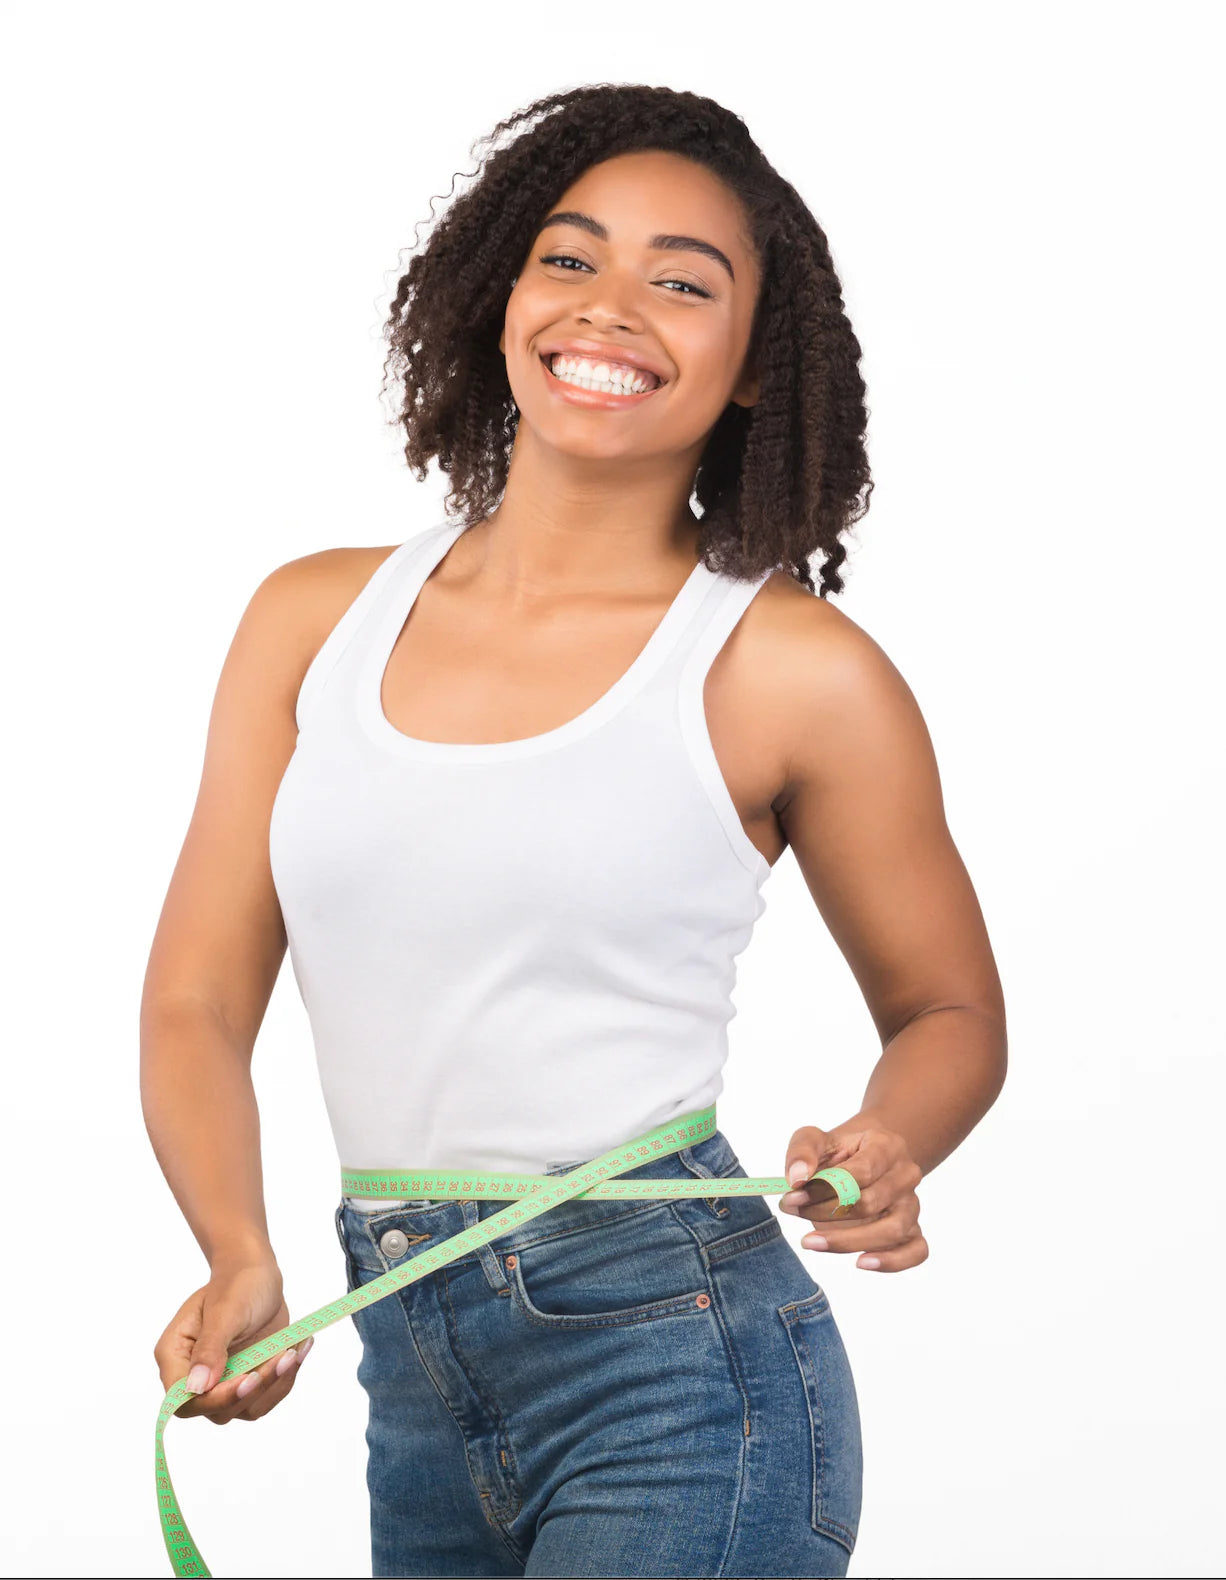 Woman with measuring tape around waist, symbolizing weight loss journey.